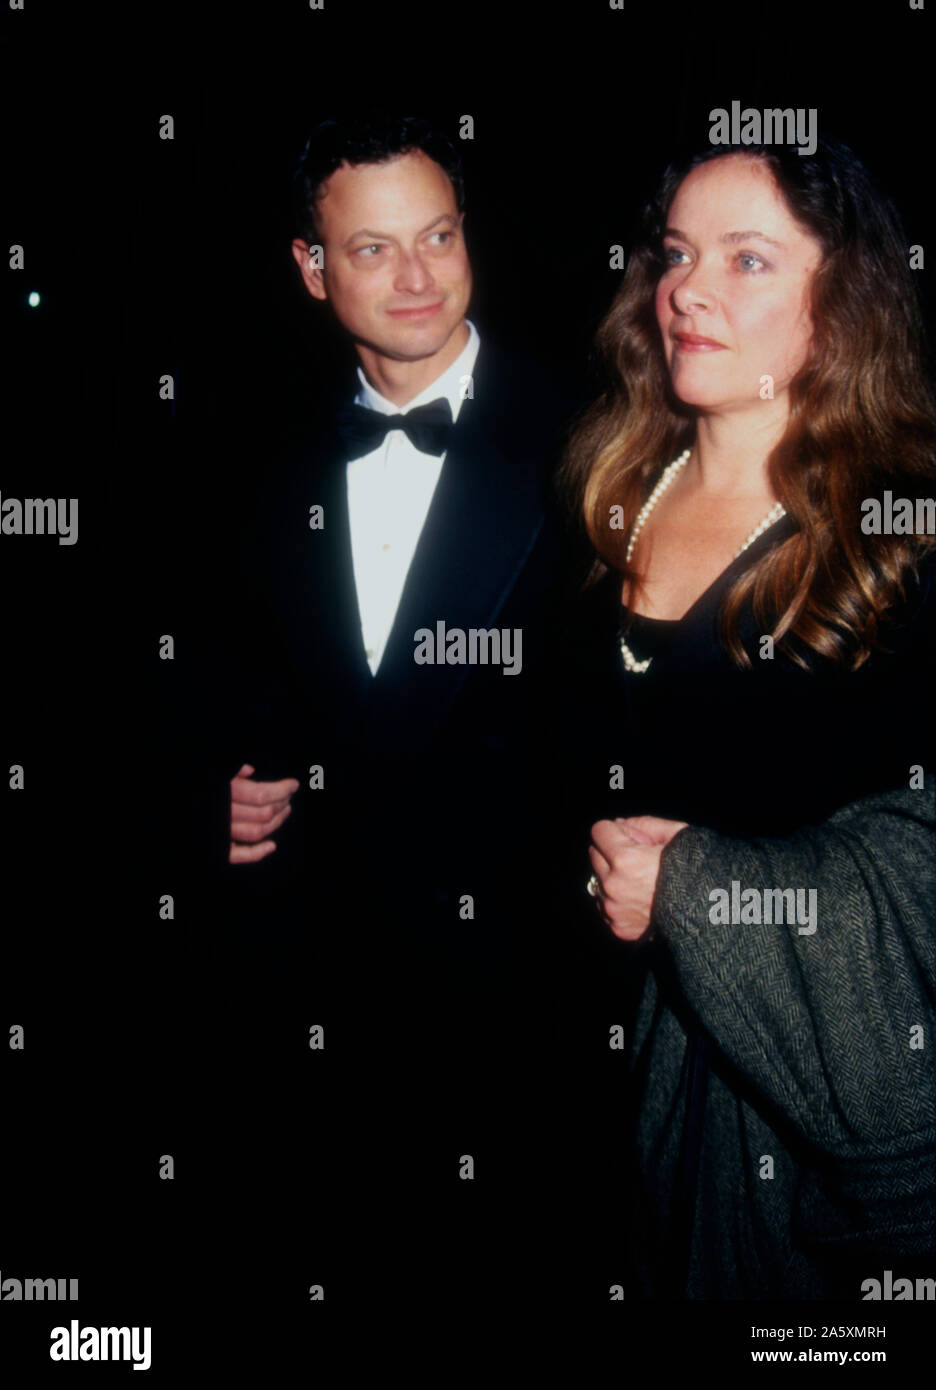 Beverly Hills, California, USA 2nd March 1995 Actor Gary Sinise and wife Moira Harris attend the 23rd Annual American Film Institute (AFI) Lifetime Achievement Award Salute to Steven Spielberg on March 2, 1995 at the Beverly Hilton Hotel in Beverly Hills, California, USA. Photo by Barry King/Alamy Stock Photo Stock Photo